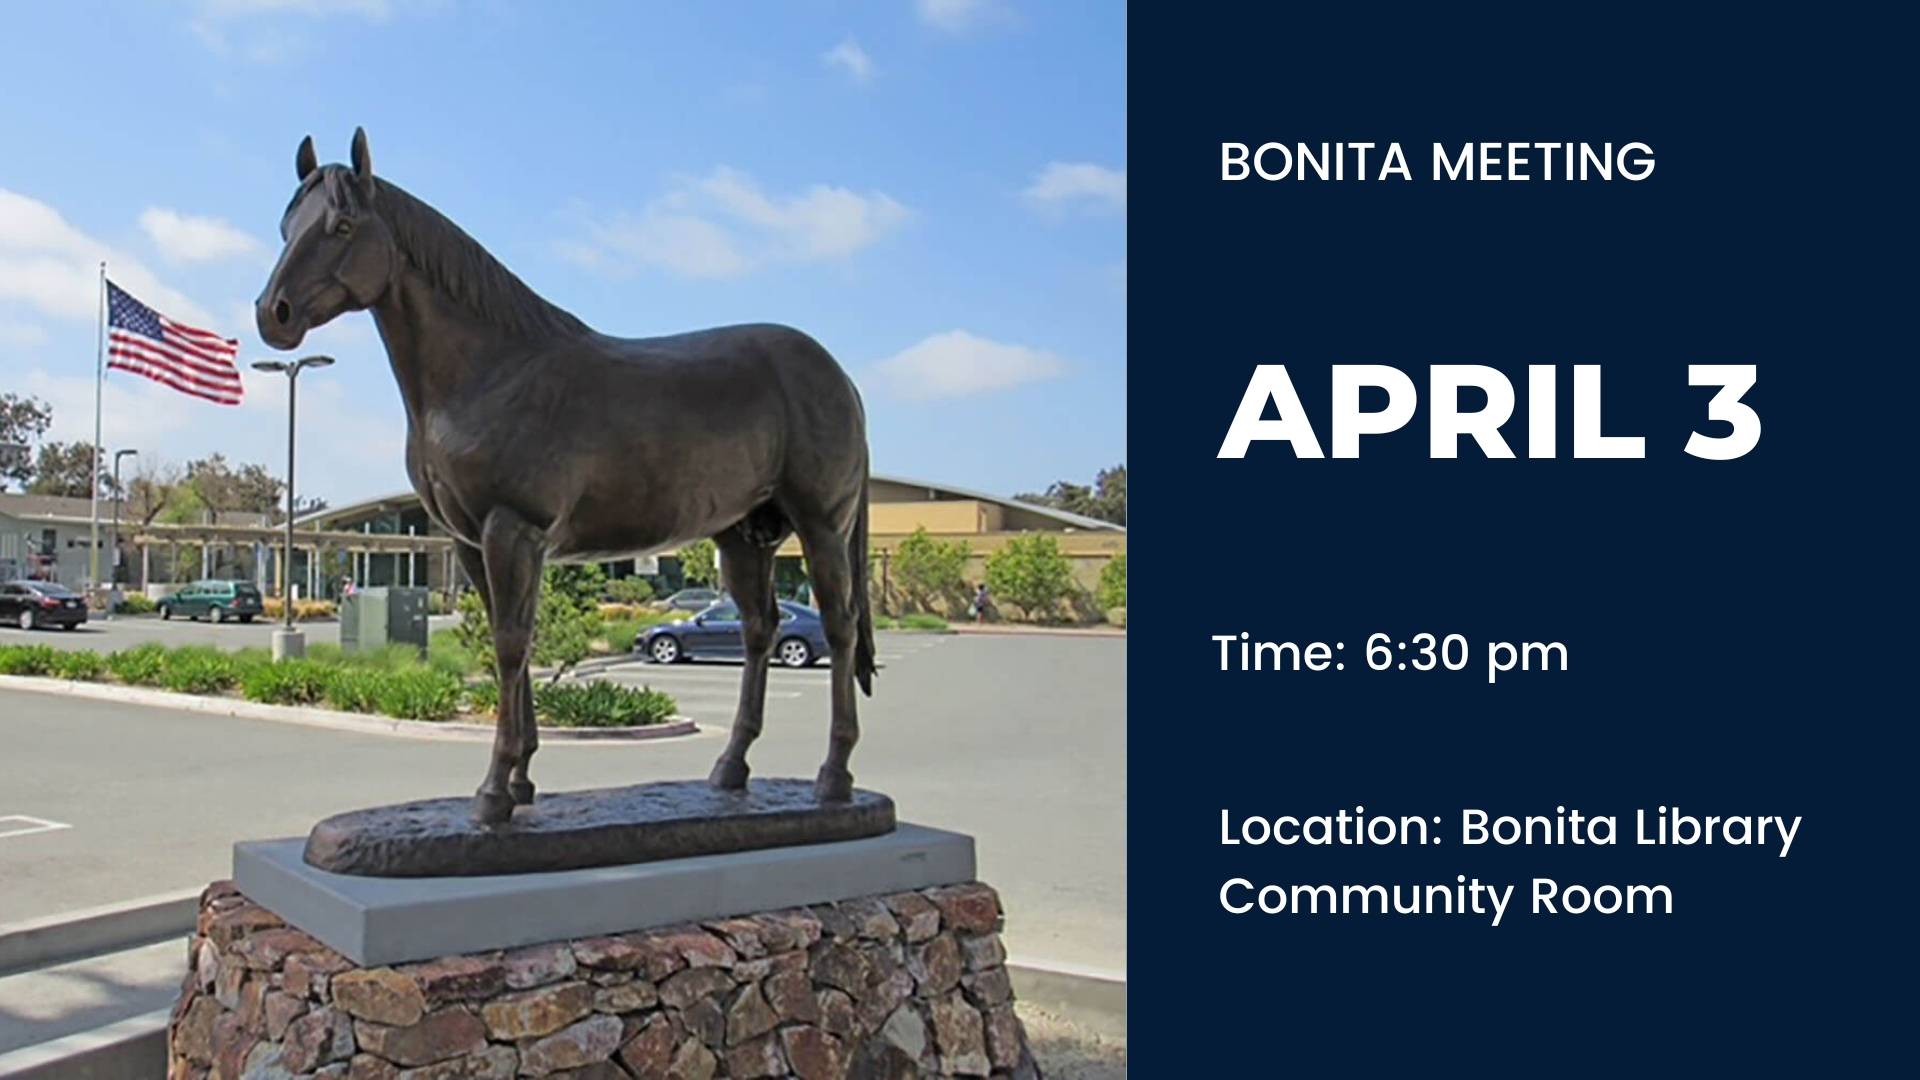 Please join the SVCA for their upcoming April 3 meeting to discuss news and important information on community topics. Read more.